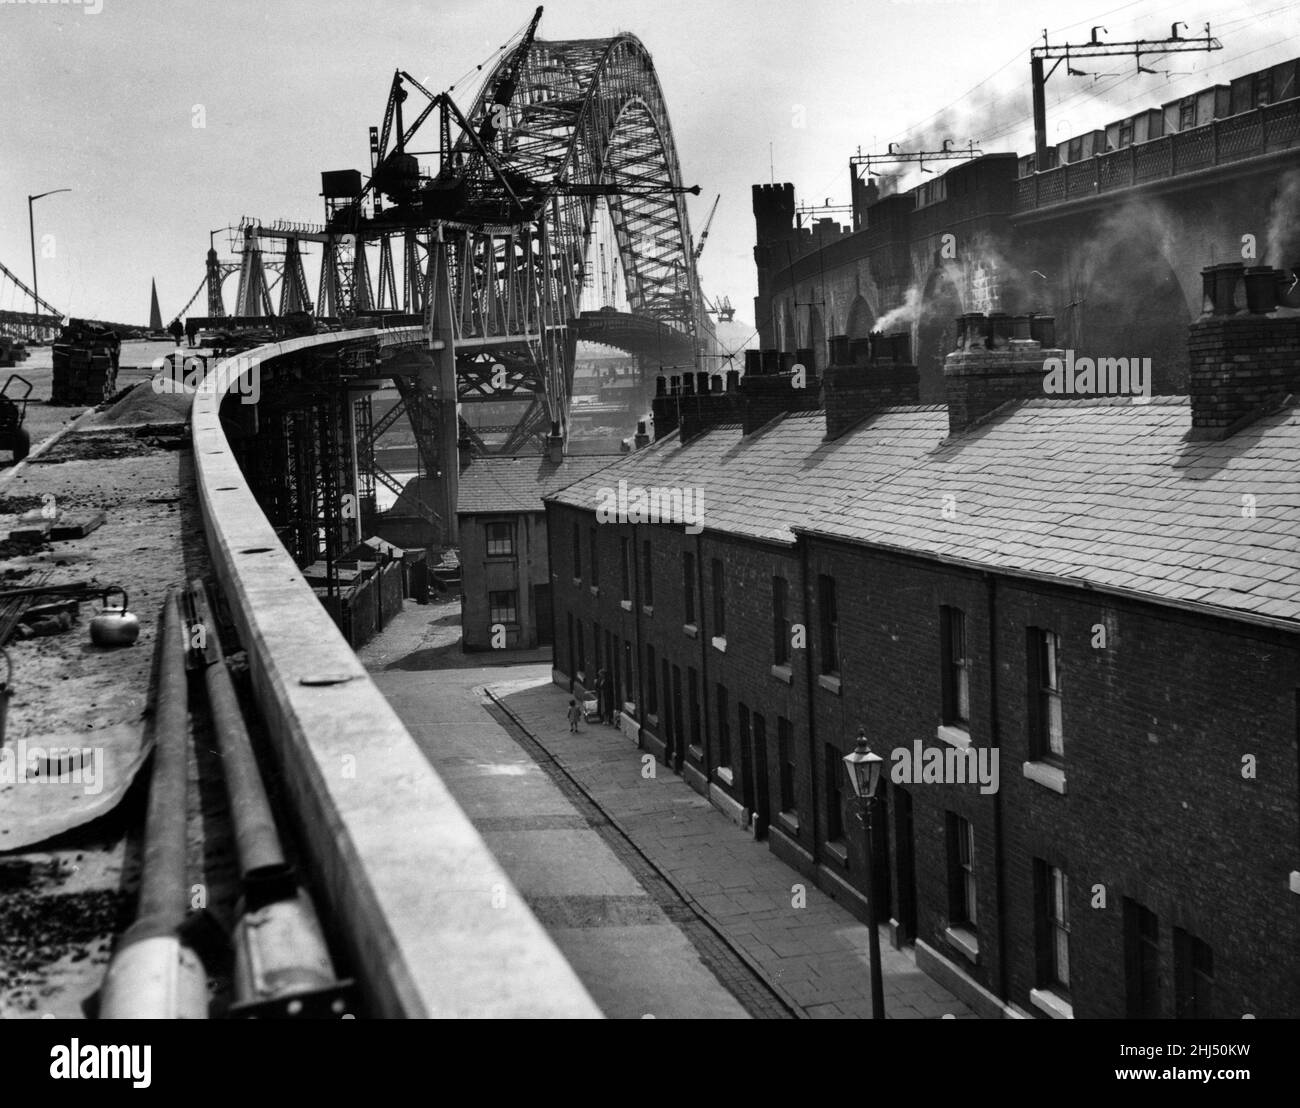 An unusual view of the Widnes-Runcorn Bridge, now almost completed, showing how the approach road soars above the rows of terraced houses in Widnes. On the right is the rail way crossing. 8th June 1961. Stock Photo